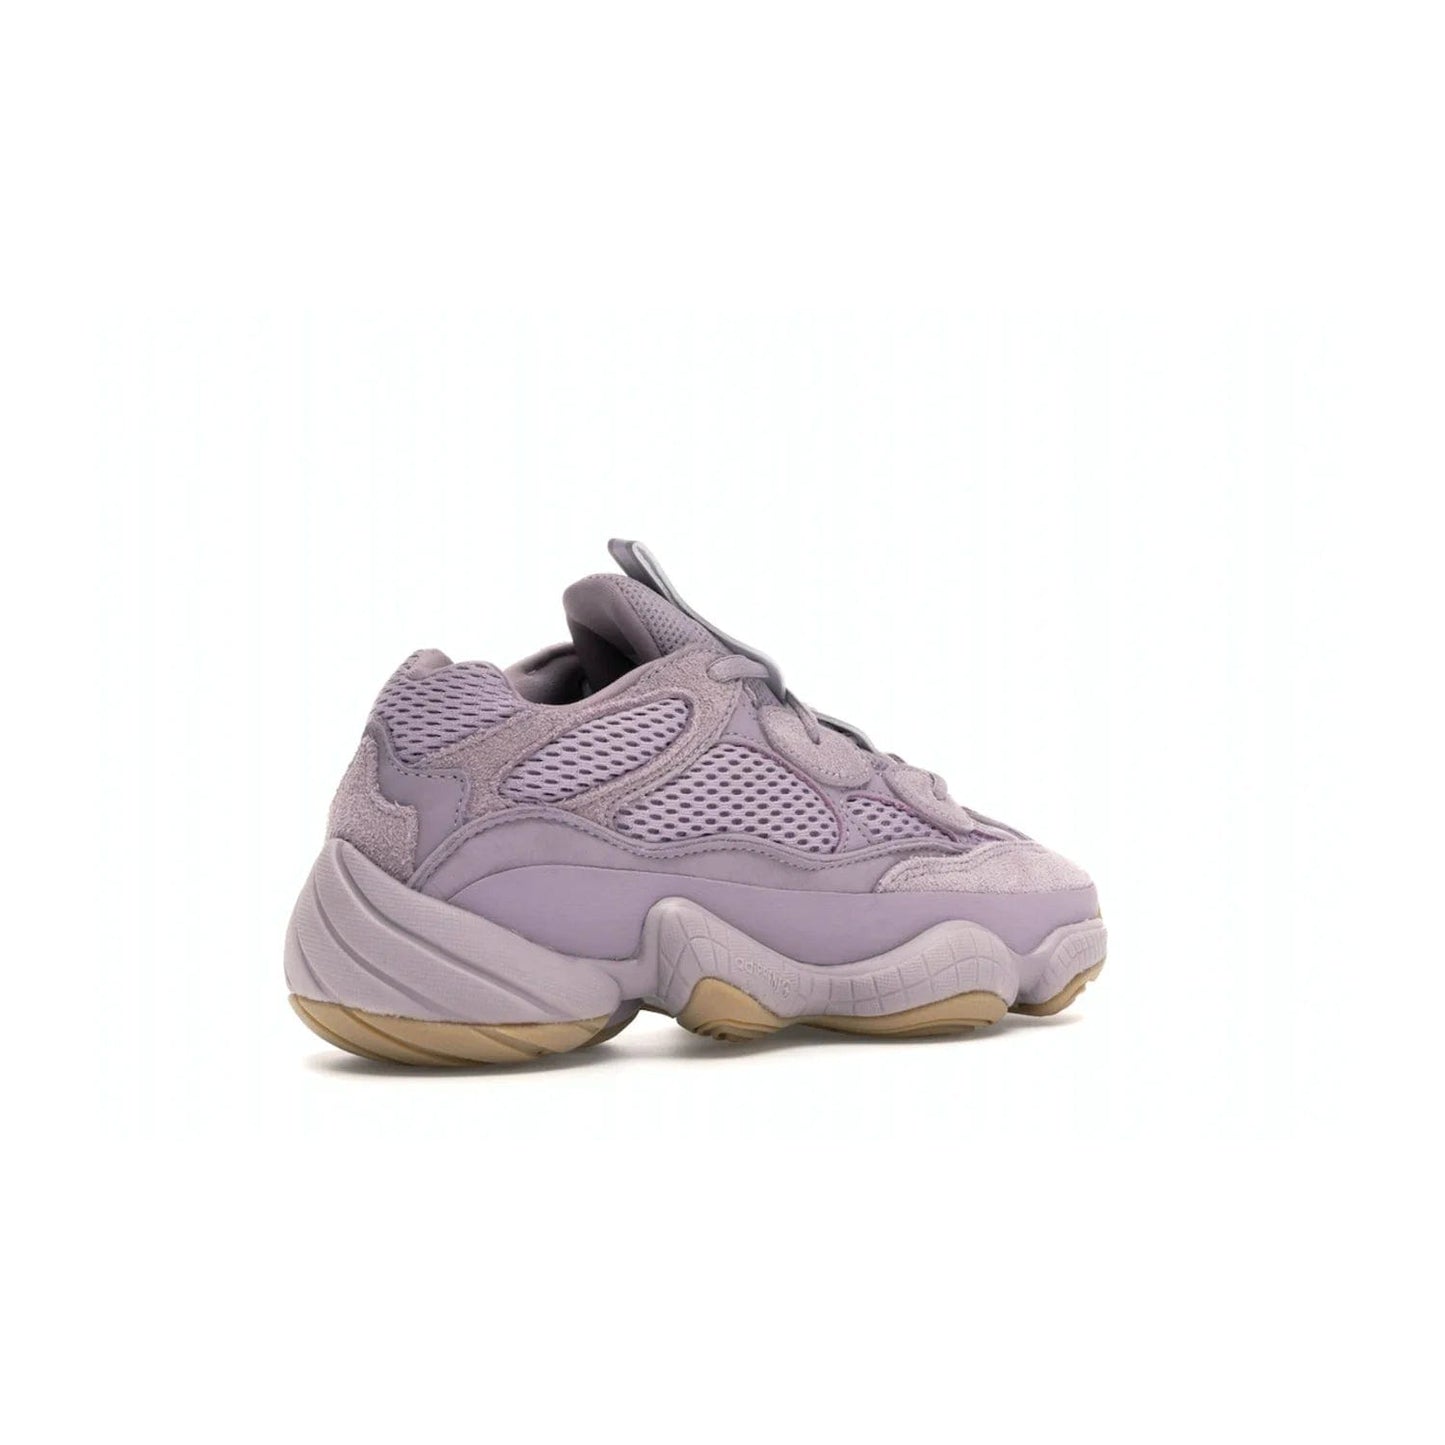 adidas Yeezy 500 Soft Vision - Image 33 - Only at www.BallersClubKickz.com - New adidas Yeezy 500 Soft Vision sneaker featuring a combination of mesh, leather, and suede in a classic Soft Vision colorway. Gum rubber outsole ensures durability and traction. An everyday sneaker that stands out from the crowd.